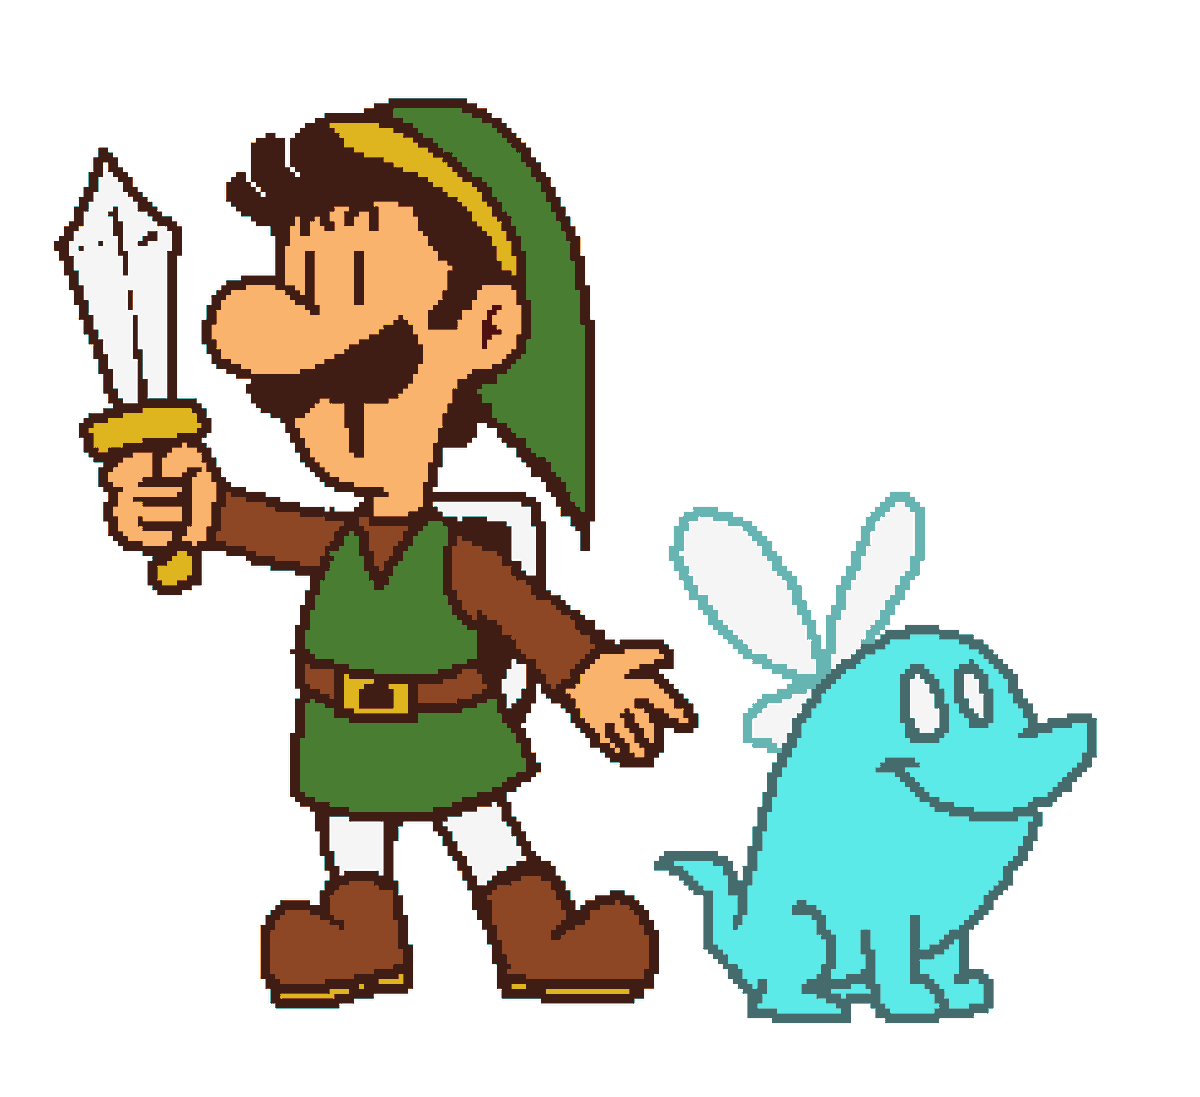 Wasn't gonna share this originally, but why not!

Today's MS Paint art are Luigi and Polterpup in Halloween costumes!